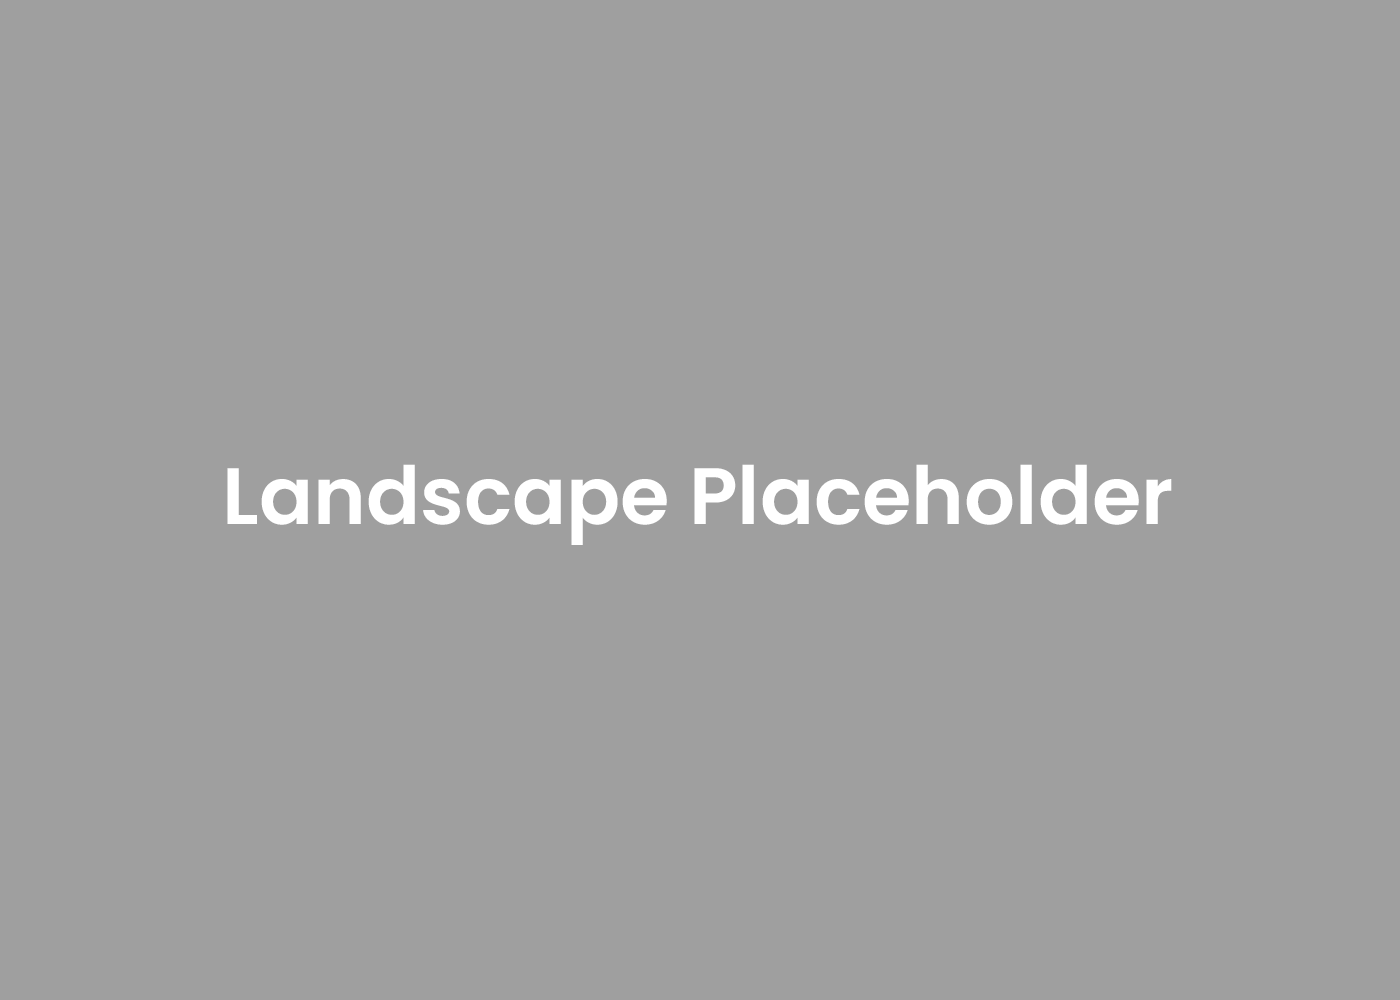 Video Placeholder